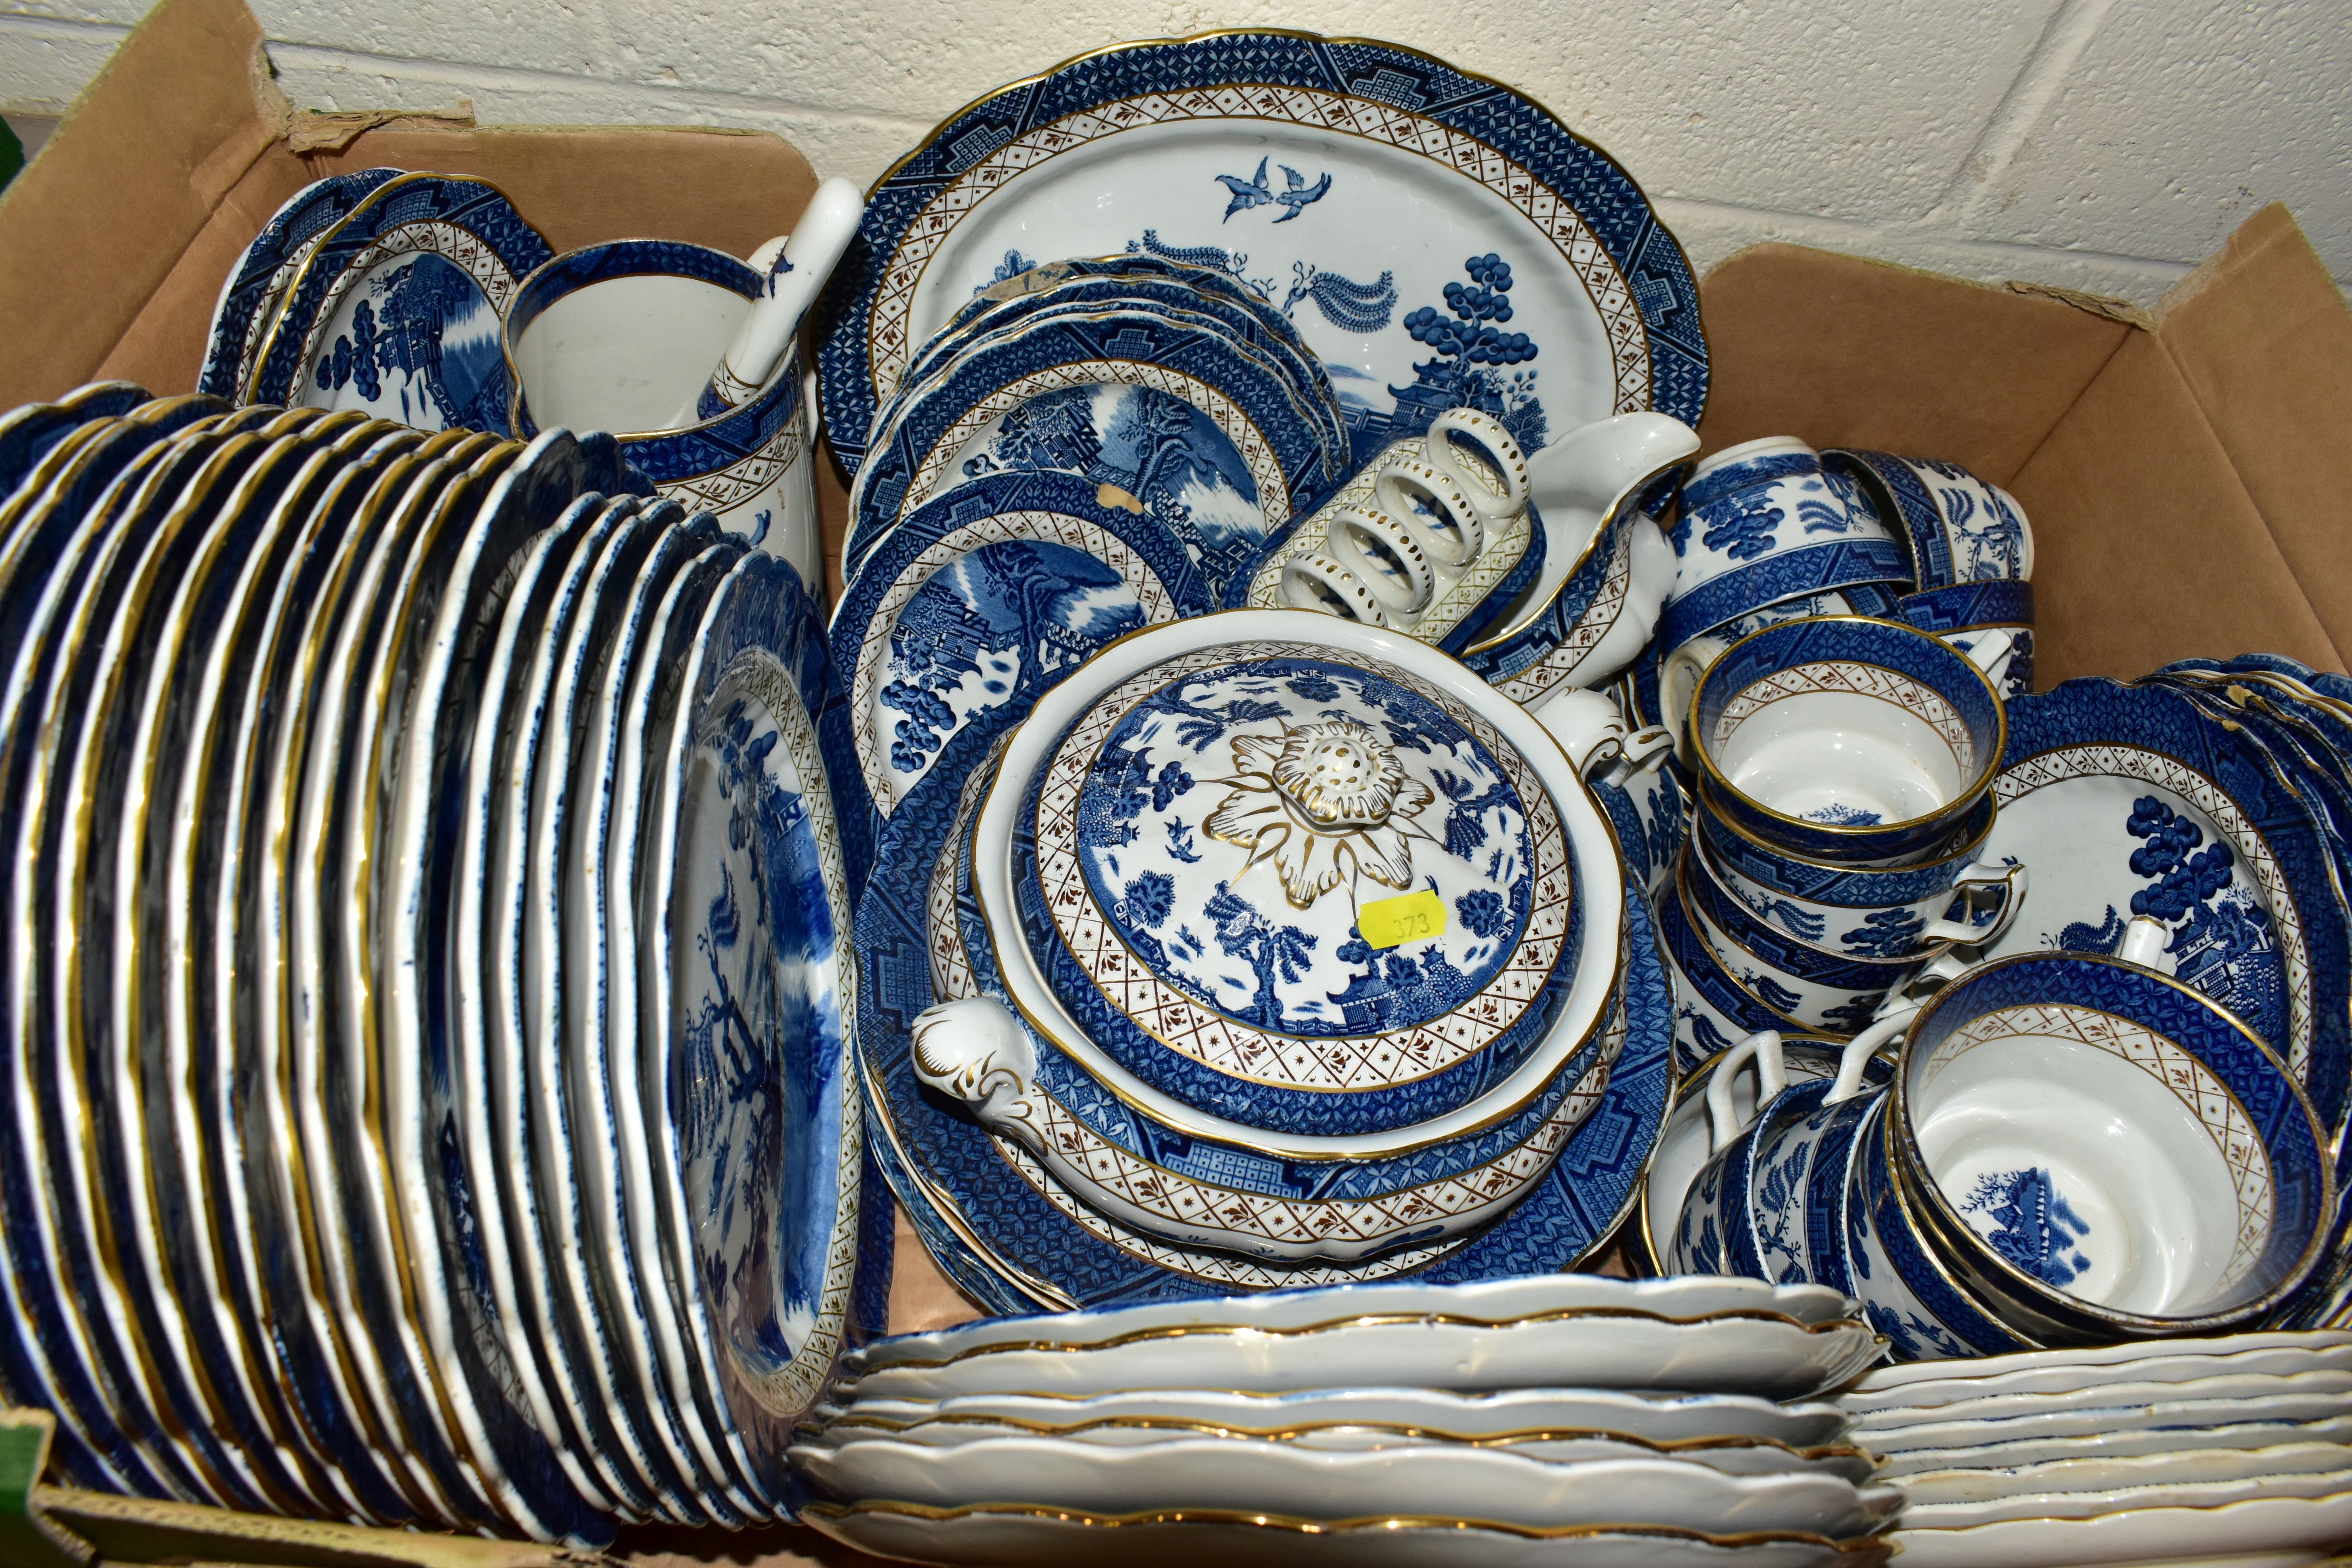 FOUR BOXES OF ROYAL DOULTON - BOOTHS 'REAL OLD WILLOW' PATTERN DINNERWARES AND TEAWARES A8025, - Image 4 of 7